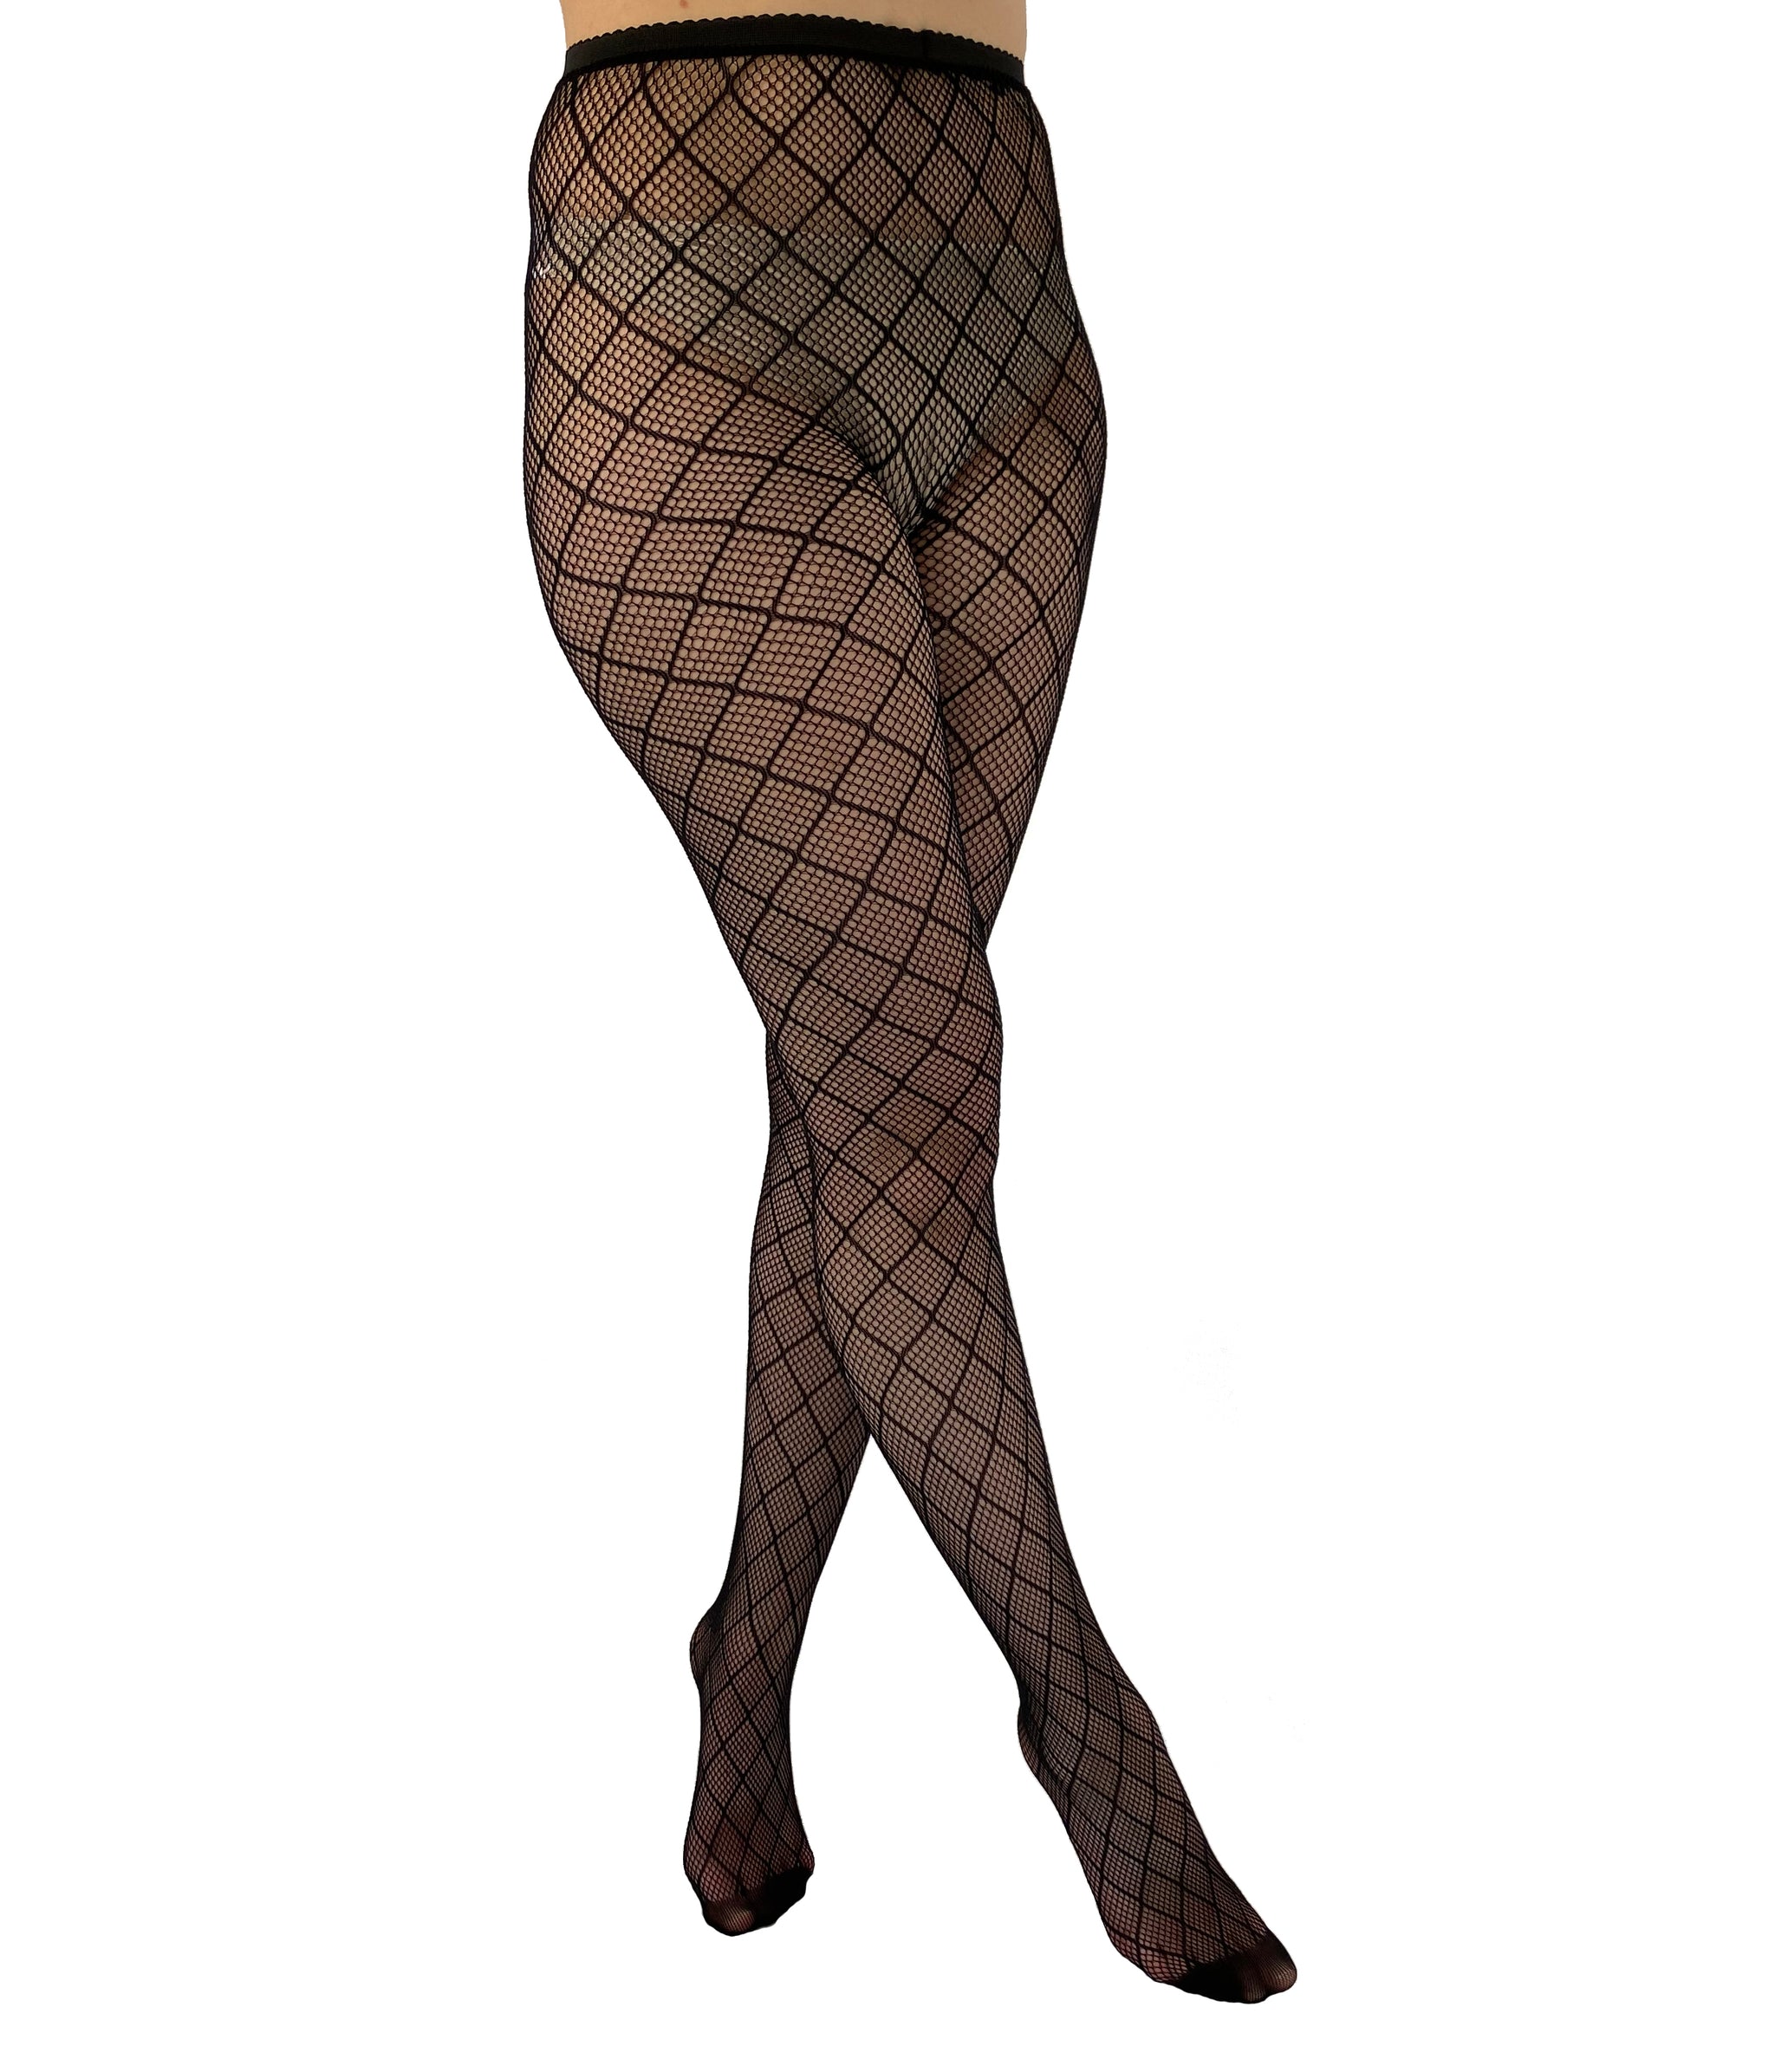 Peacock Feather Net Tights